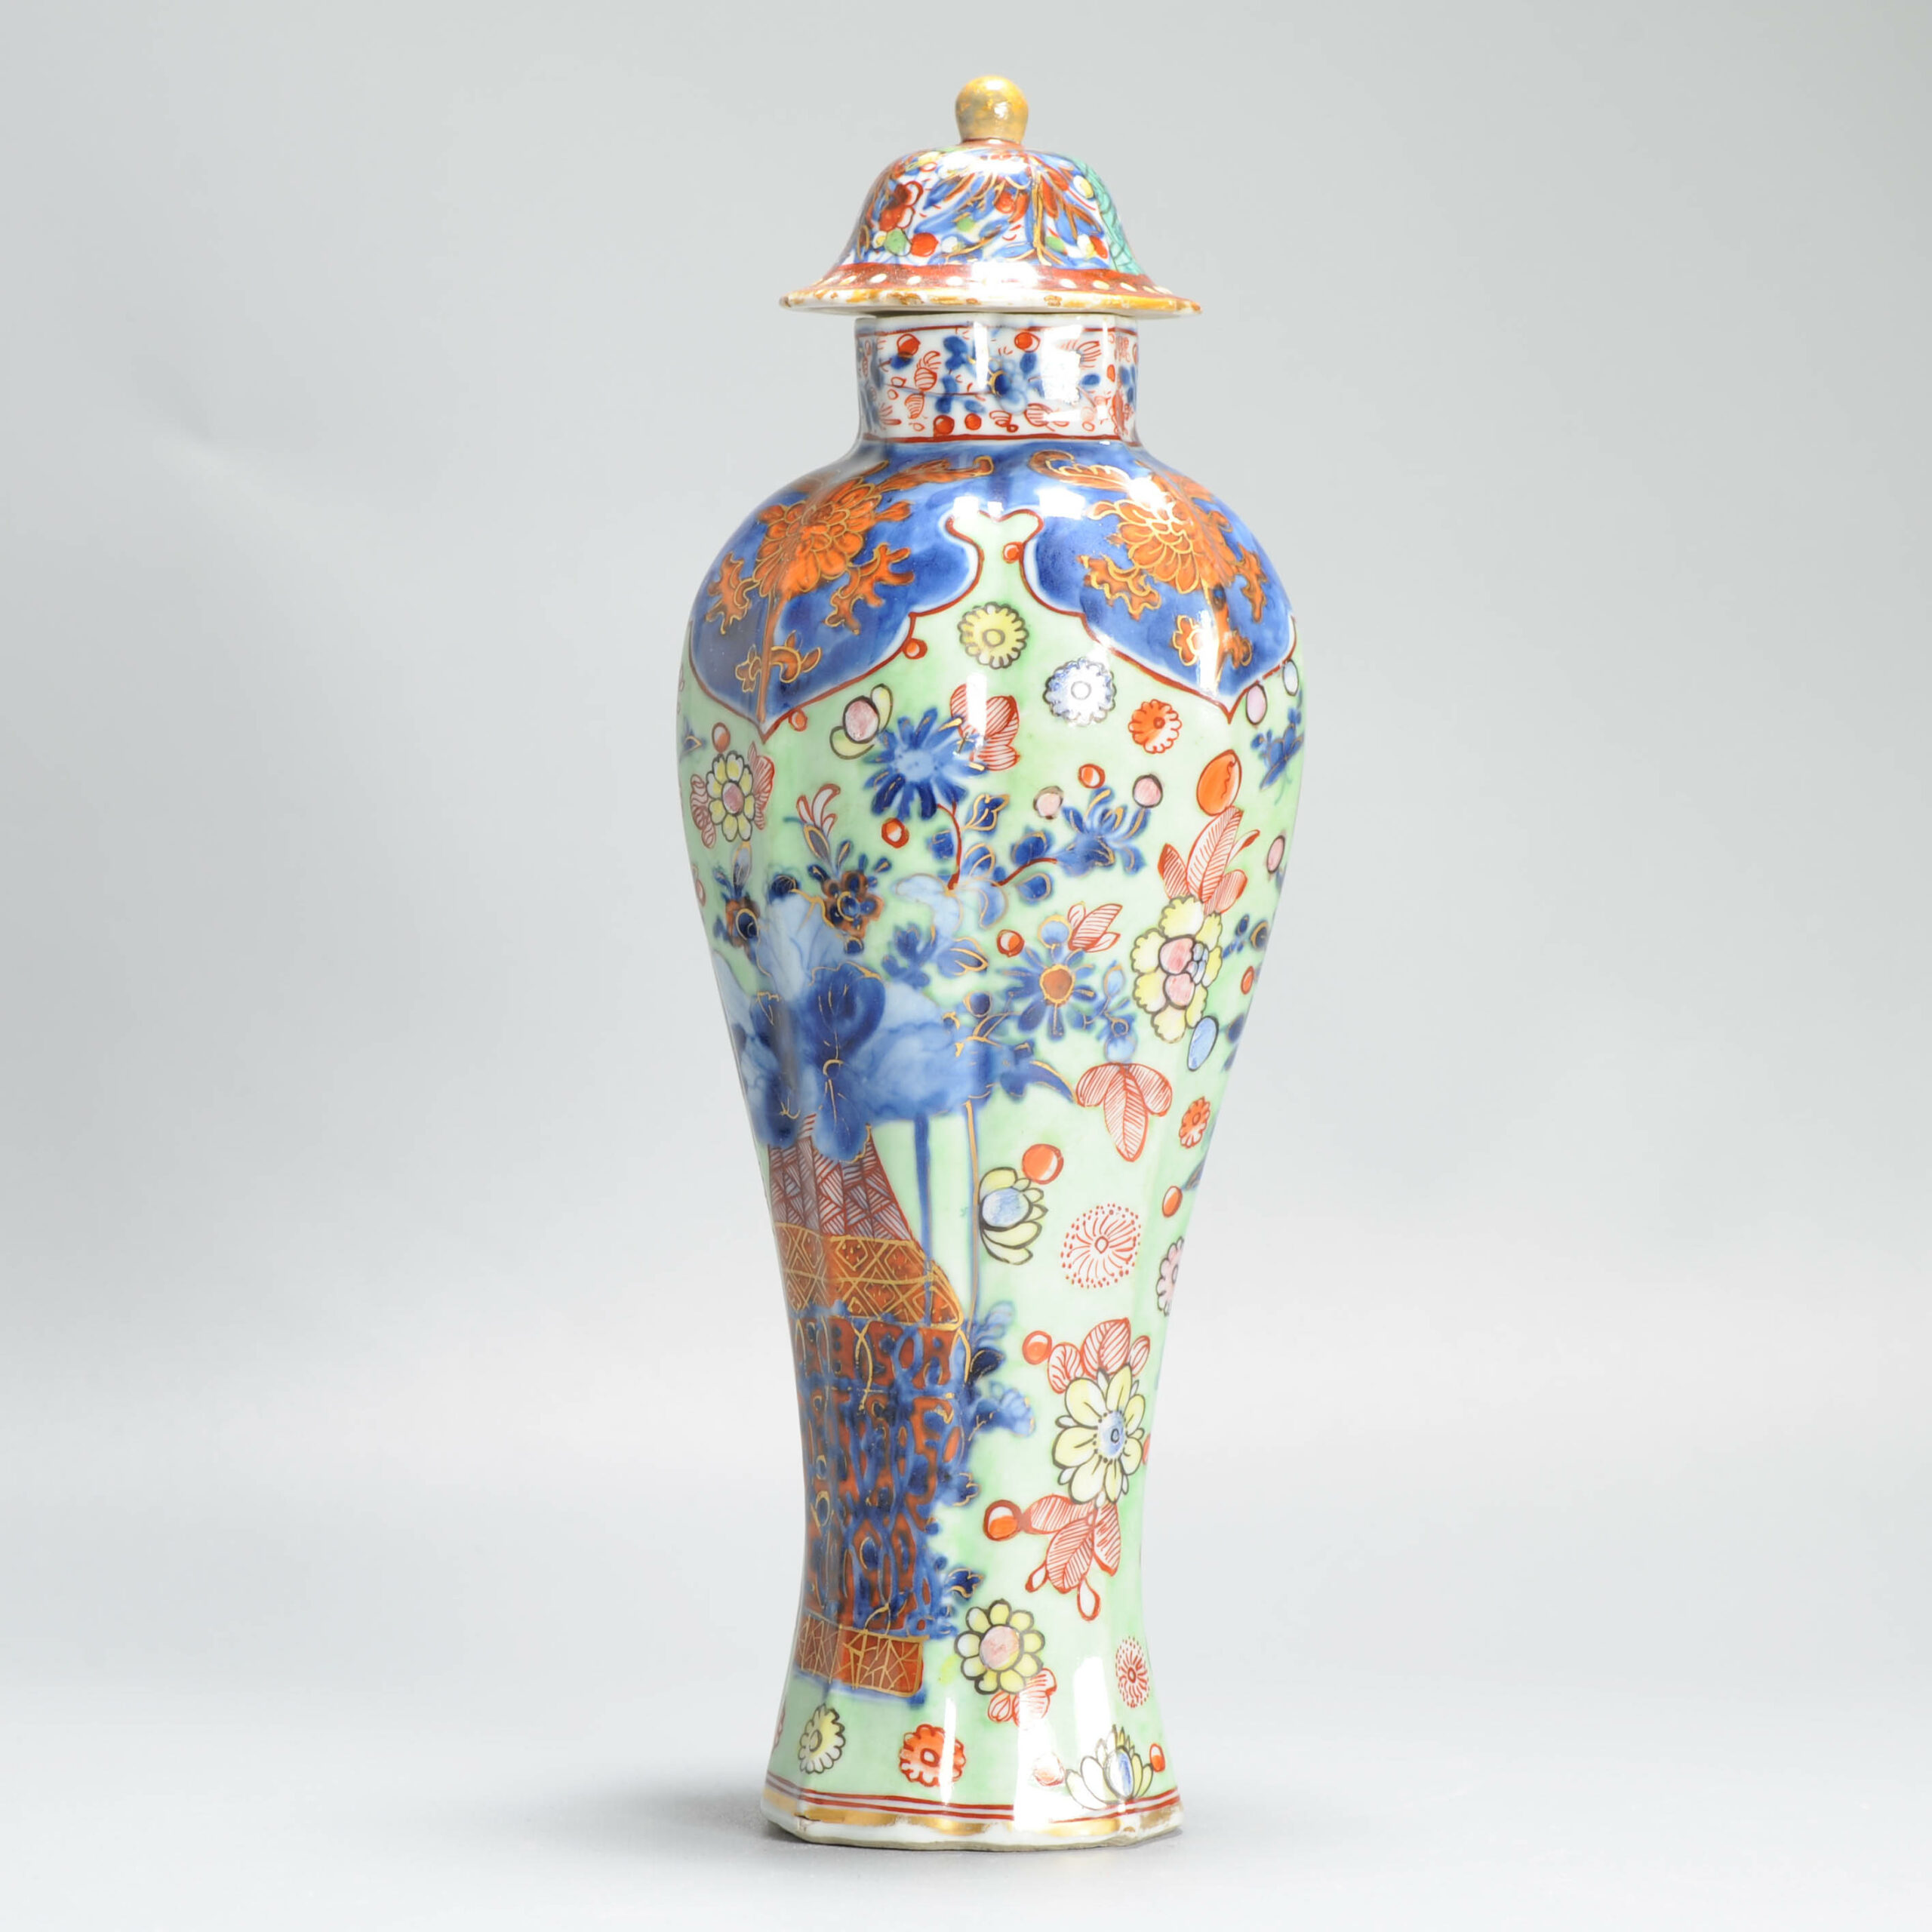 1356 Antique 17th C Chinese Kangxi Lidded Vase. Redecorated in Europe. Most Likely in the UK around 1780-1830